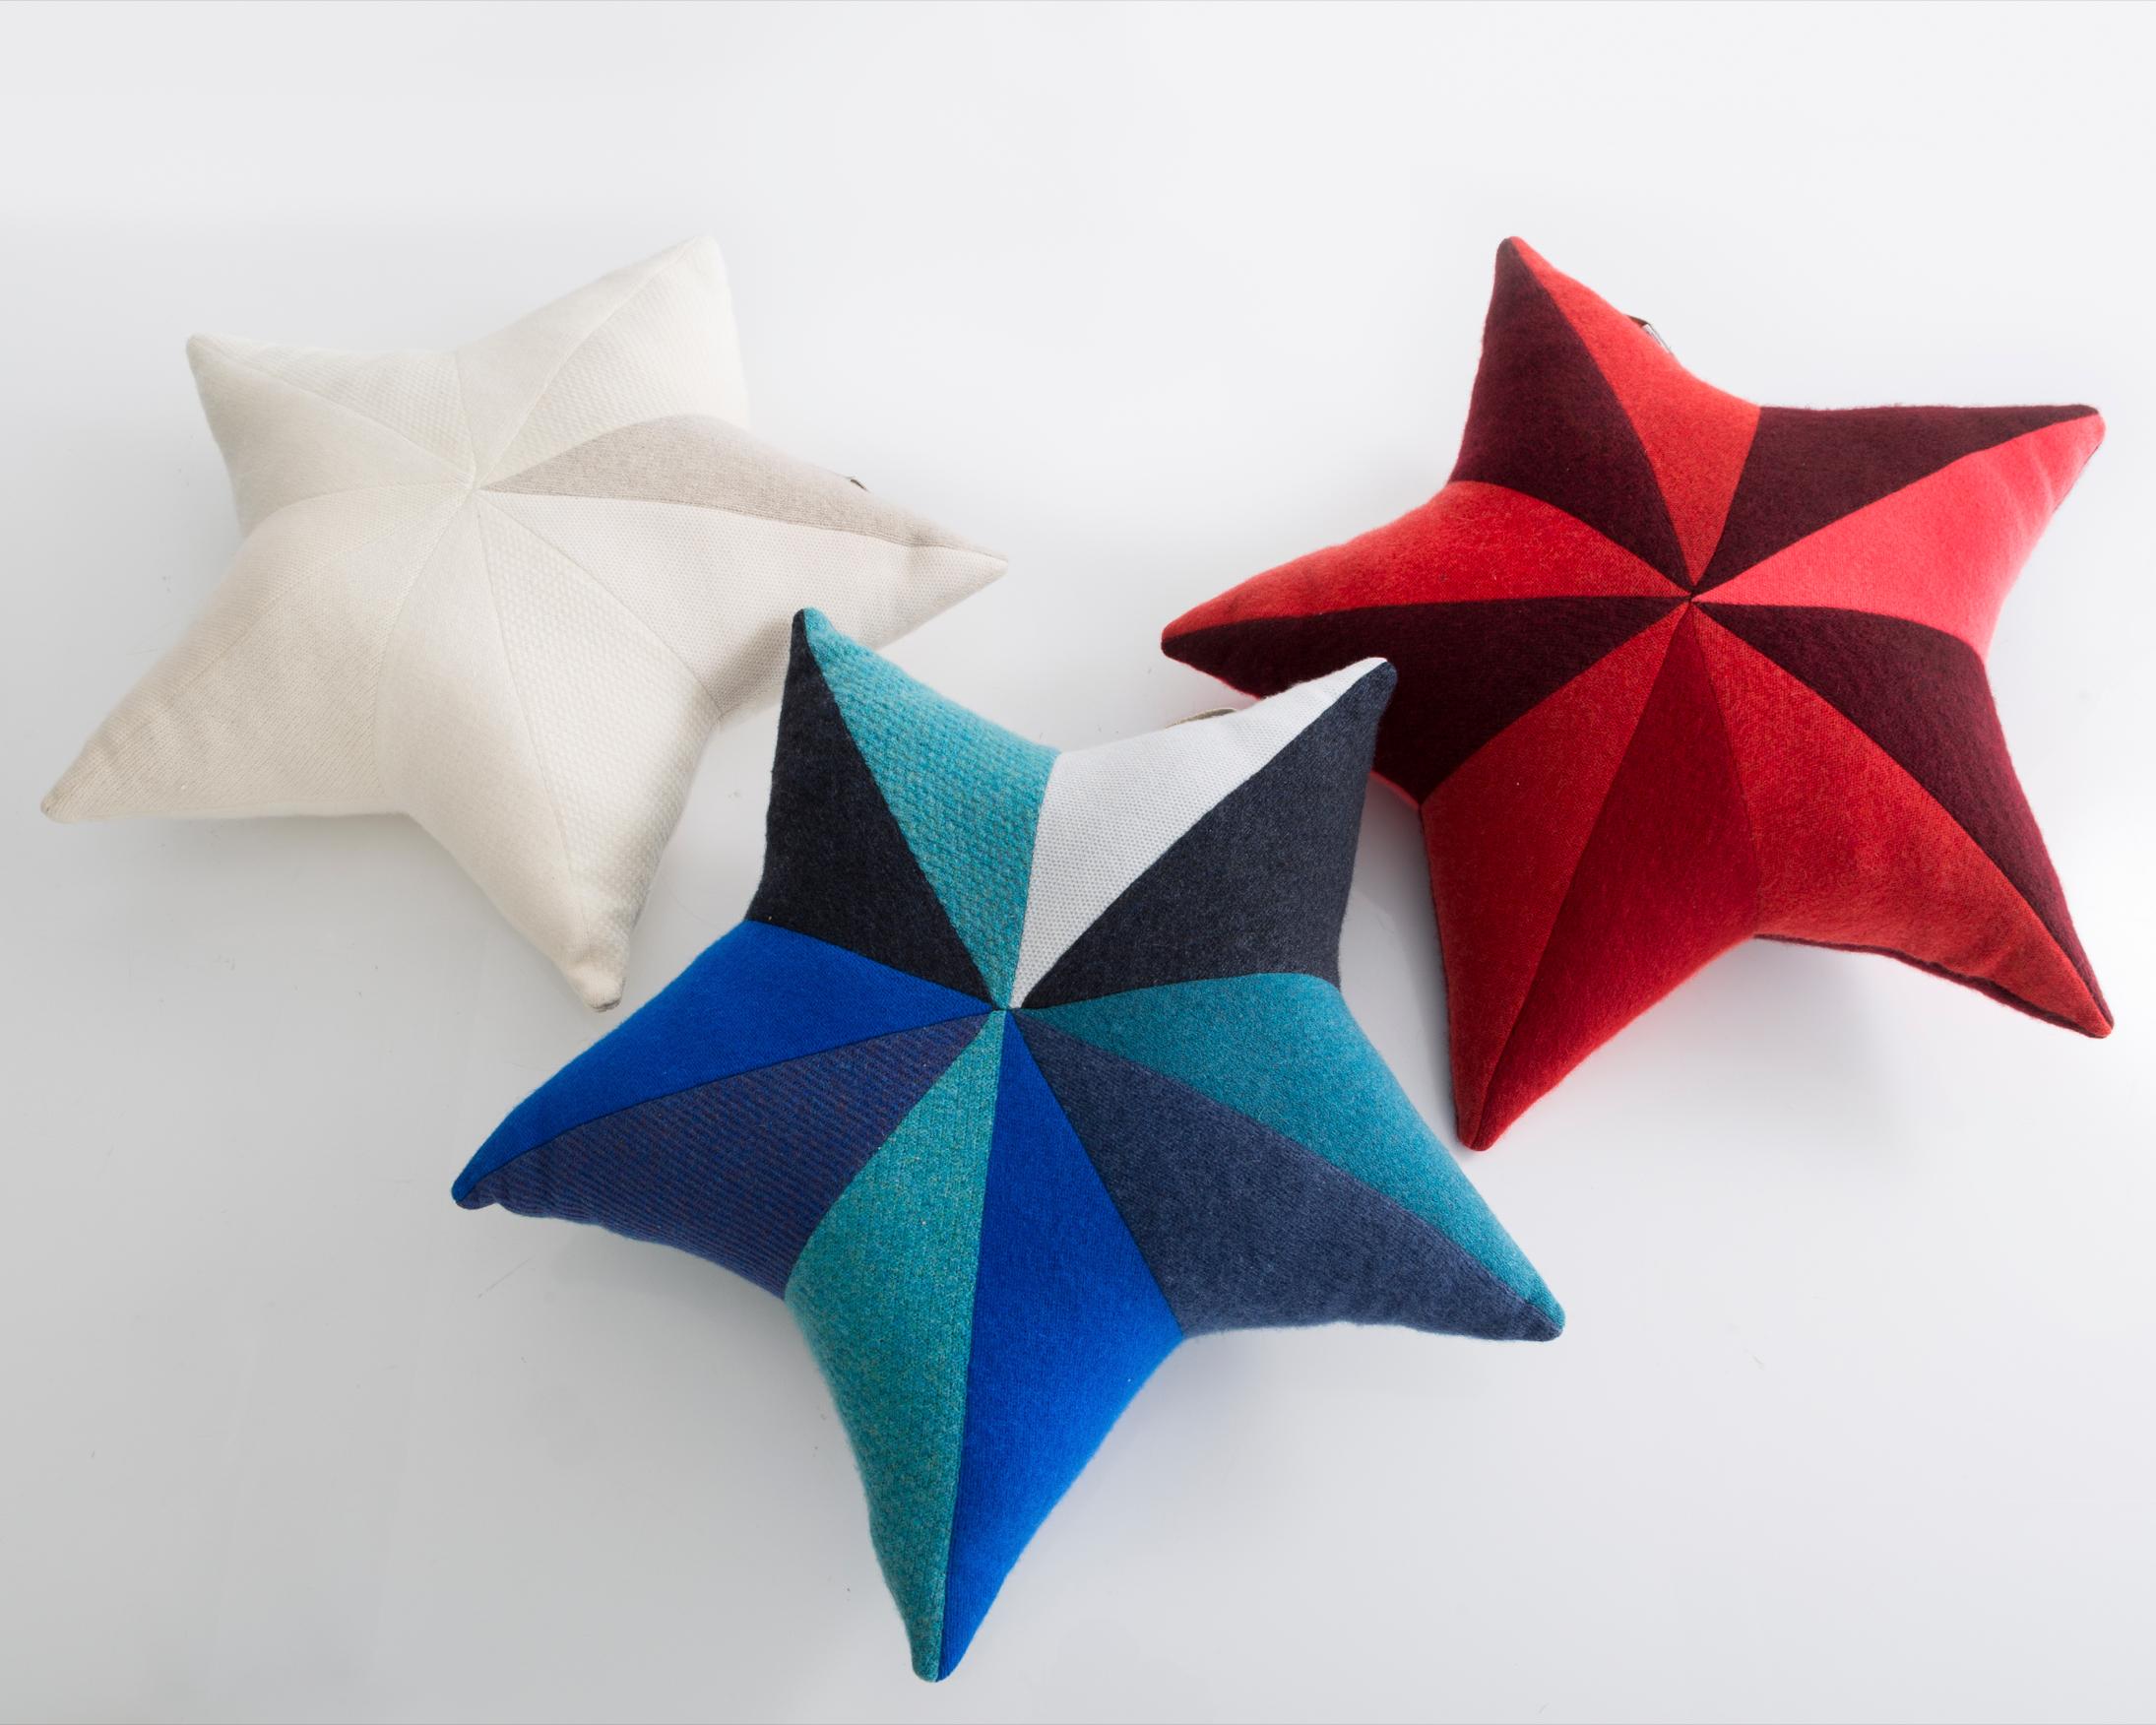 Modern Star-Shaped Patchwordk Pillow in Blue Cashmere by Greg Chait, 2017